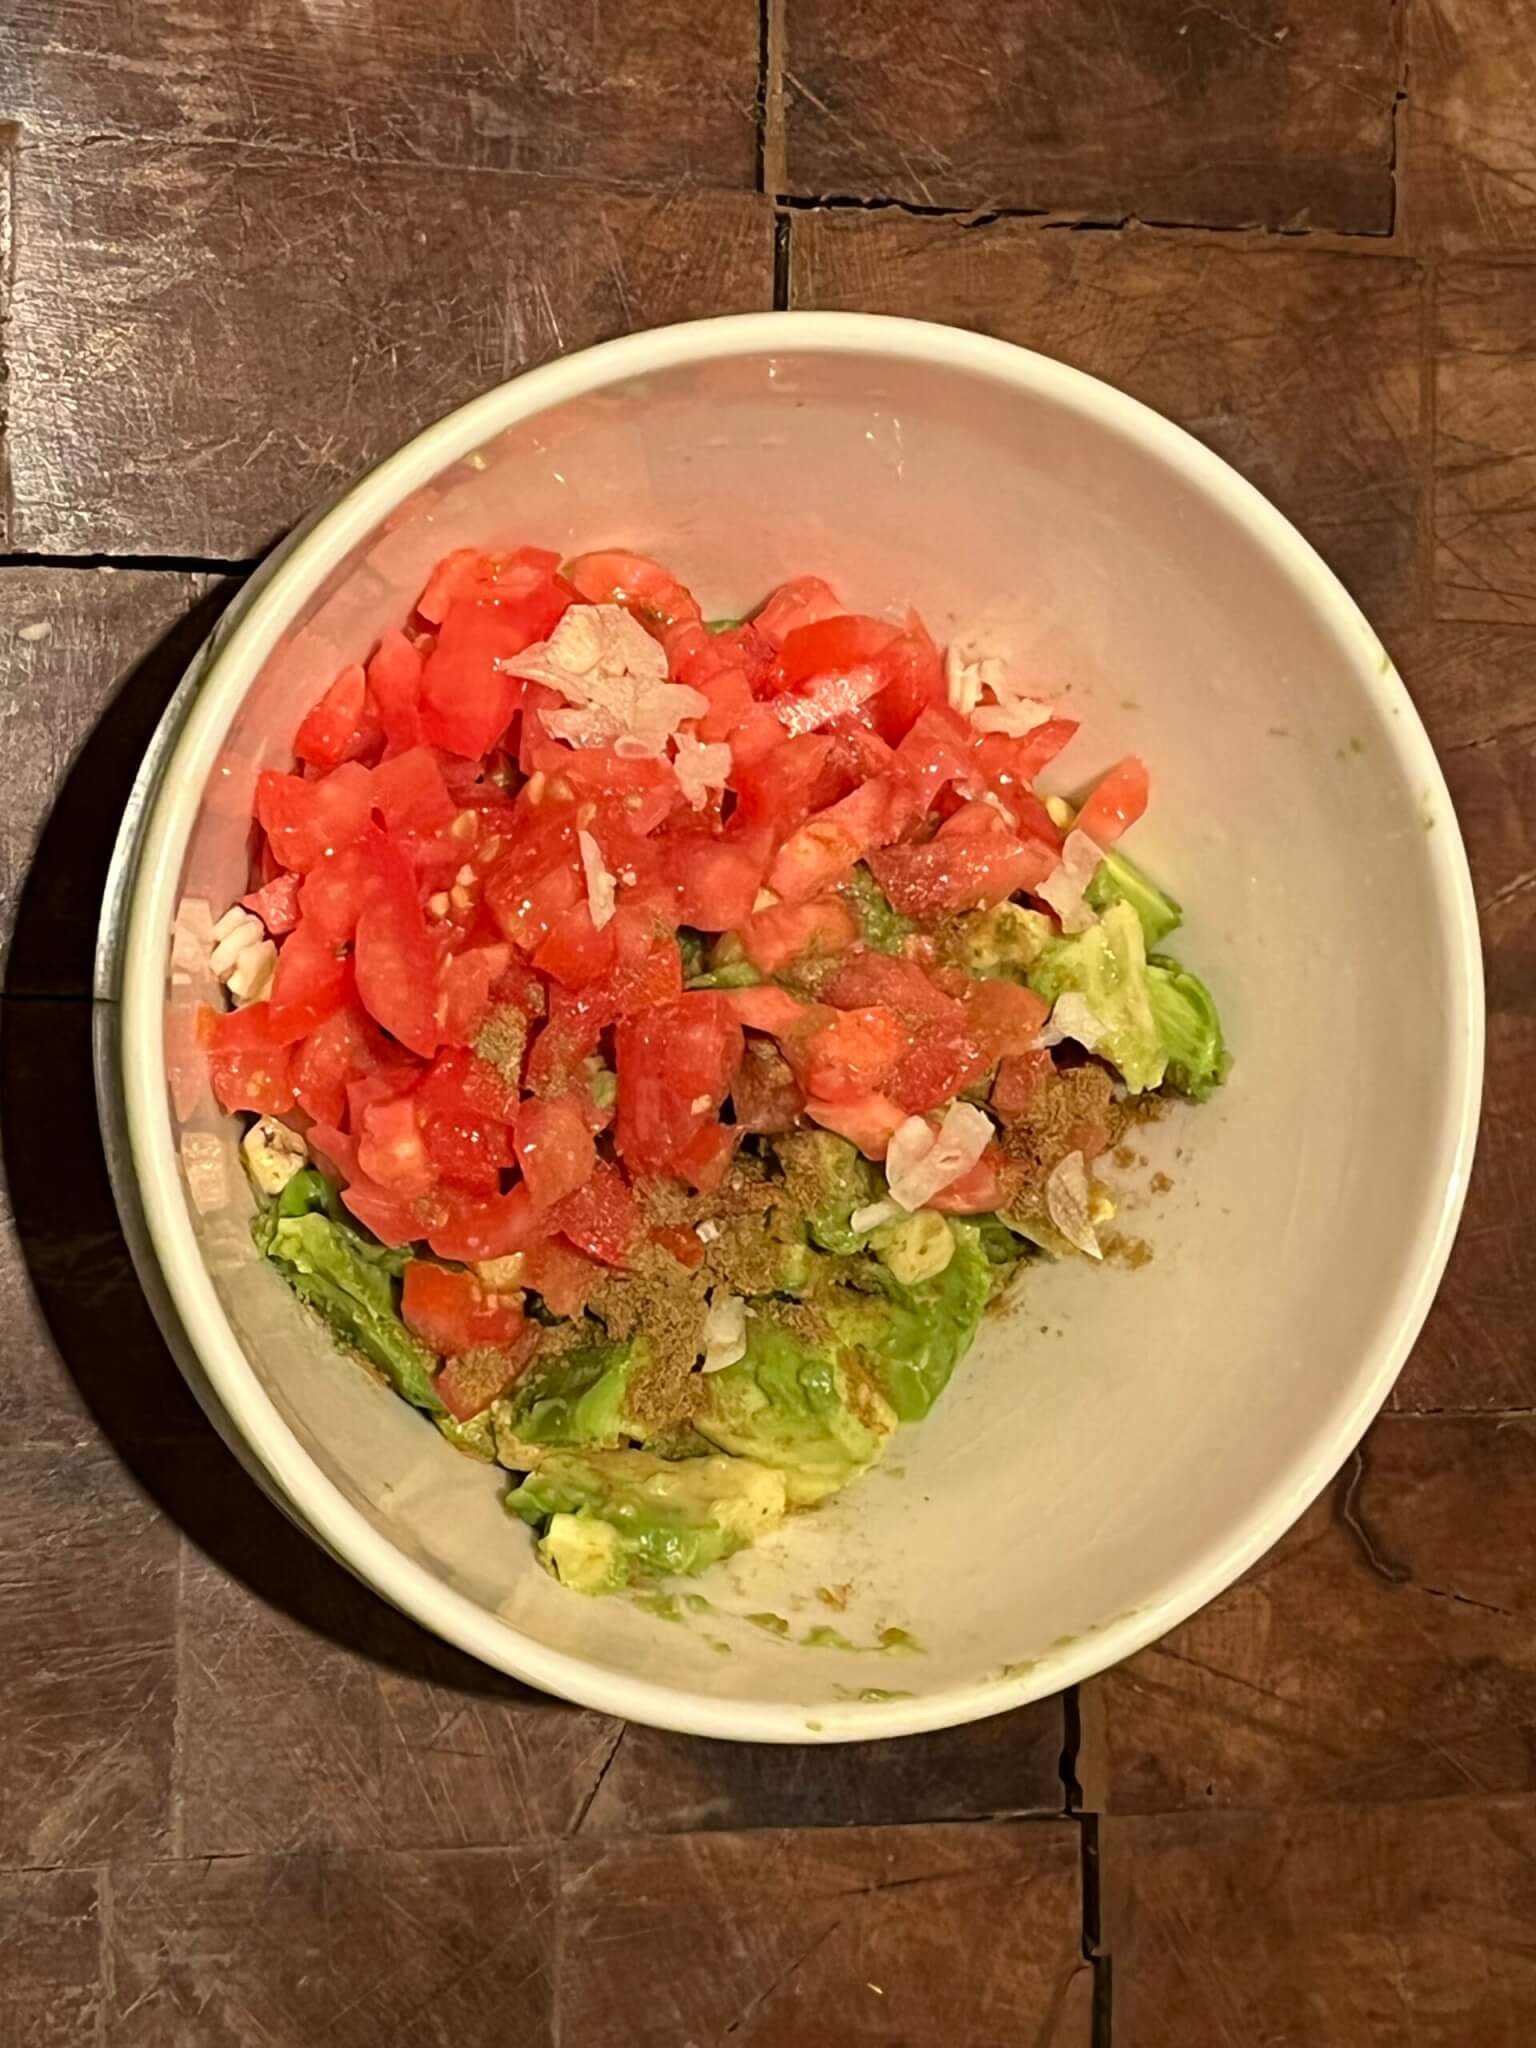 Diced tomatoes and chopped avocados mixed together with spices in a bowl